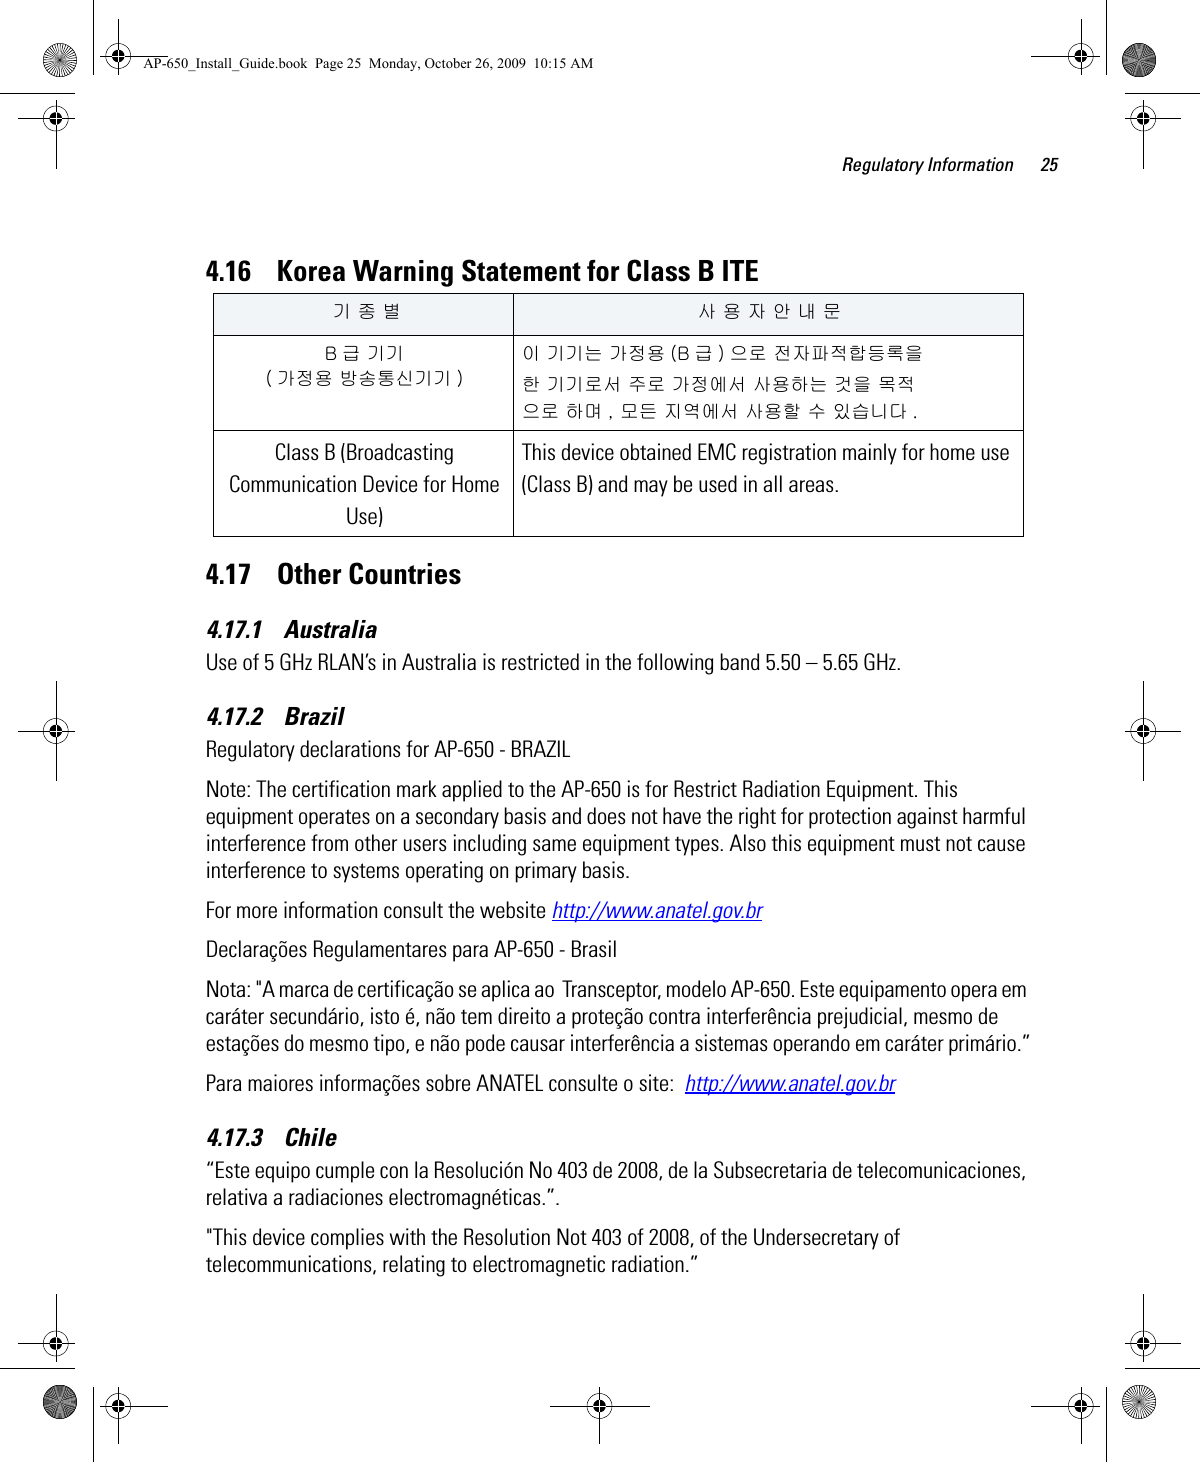 Regulatory Information 254.16    Korea Warning Statement for Class B ITE4.17    Other Countries4.17.1    AustraliaUse of 5 GHz RLAN’s in Australia is restricted in the following band 5.50 – 5.65 GHz.4.17.2    BrazilRegulatory declarations for AP-650 - BRAZILNote: The certification mark applied to the AP-650 is for Restrict Radiation Equipment. This equipment operates on a secondary basis and does not have the right for protection against harmful interference from other users including same equipment types. Also this equipment must not cause interference to systems operating on primary basis. For more information consult the website http://www.anatel.gov.brDeclarações Regulamentares para AP-650 - BrasilNota: &quot;A marca de certificação se aplica ao  Transceptor, modelo AP-650. Este equipamento opera em caráter secundário, isto é, não tem direito a proteção contra interferência prejudicial, mesmo de estações do mesmo tipo, e não pode causar interferência a sistemas operando em caráter primário.”Para maiores informações sobre ANATEL consulte o site:  http://www.anatel.gov.br4.17.3    Chile“Este equipo cumple con la Resolución No 403 de 2008, de la Subsecretaria de telecomunicaciones, relativa a radiaciones electromagnéticas.”.&quot;This device complies with the Resolution Not 403 of 2008, of the Undersecretary of telecommunications, relating to electromagnetic radiation.”   기 종 별 사 용 자 안 내 문B급 기기 ( 가정용 방송통신기기 )이 기기는 가정용 (B 급 ) 으로 전자파적합등록을한 기기로서 주로 가정에서 사용하는 것을 목적으로 하며 , 모든 지역에서 사용할 수 있습니다 .Class B (Broadcasting Communication Device for Home Use) This device obtained EMC registration mainly for home use (Class B) and may be used in all areas.AP-650_Install_Guide.book  Page 25  Monday, October 26, 2009  10:15 AM